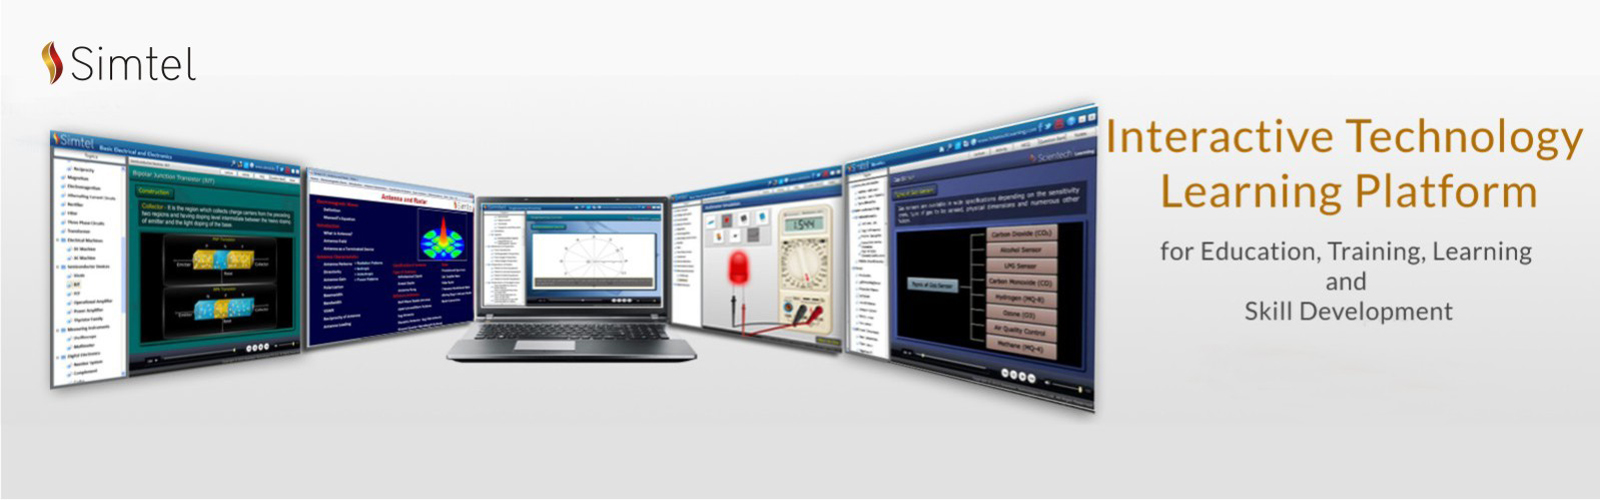 Simtel - Technology Learning Software